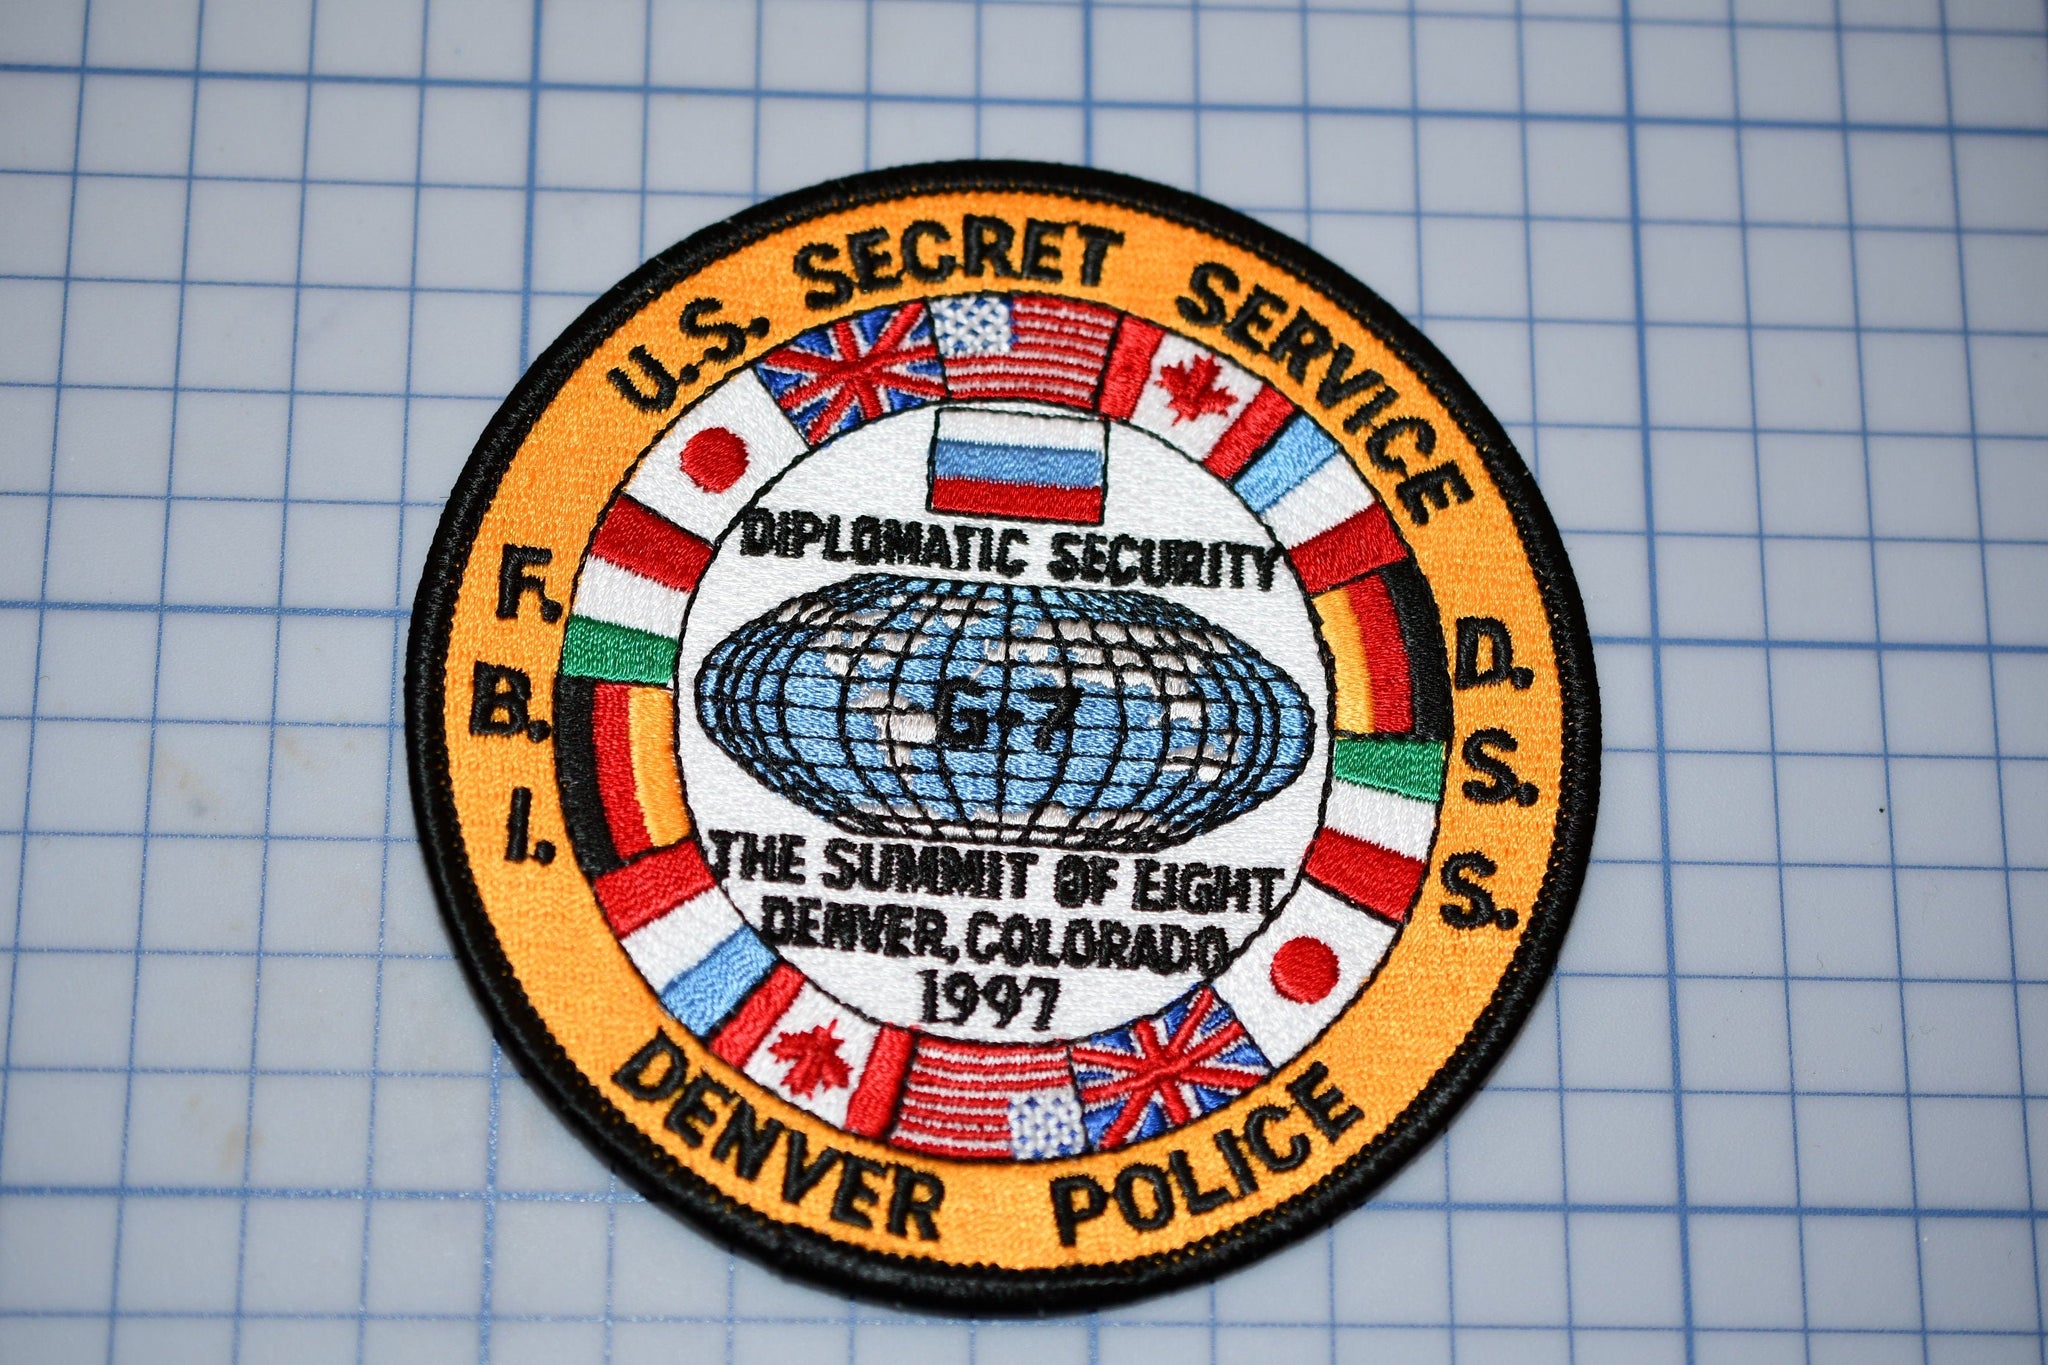 USSS FBI DSS Denver Police "The Summit Of Eight" 1997 Patch (B27-326)